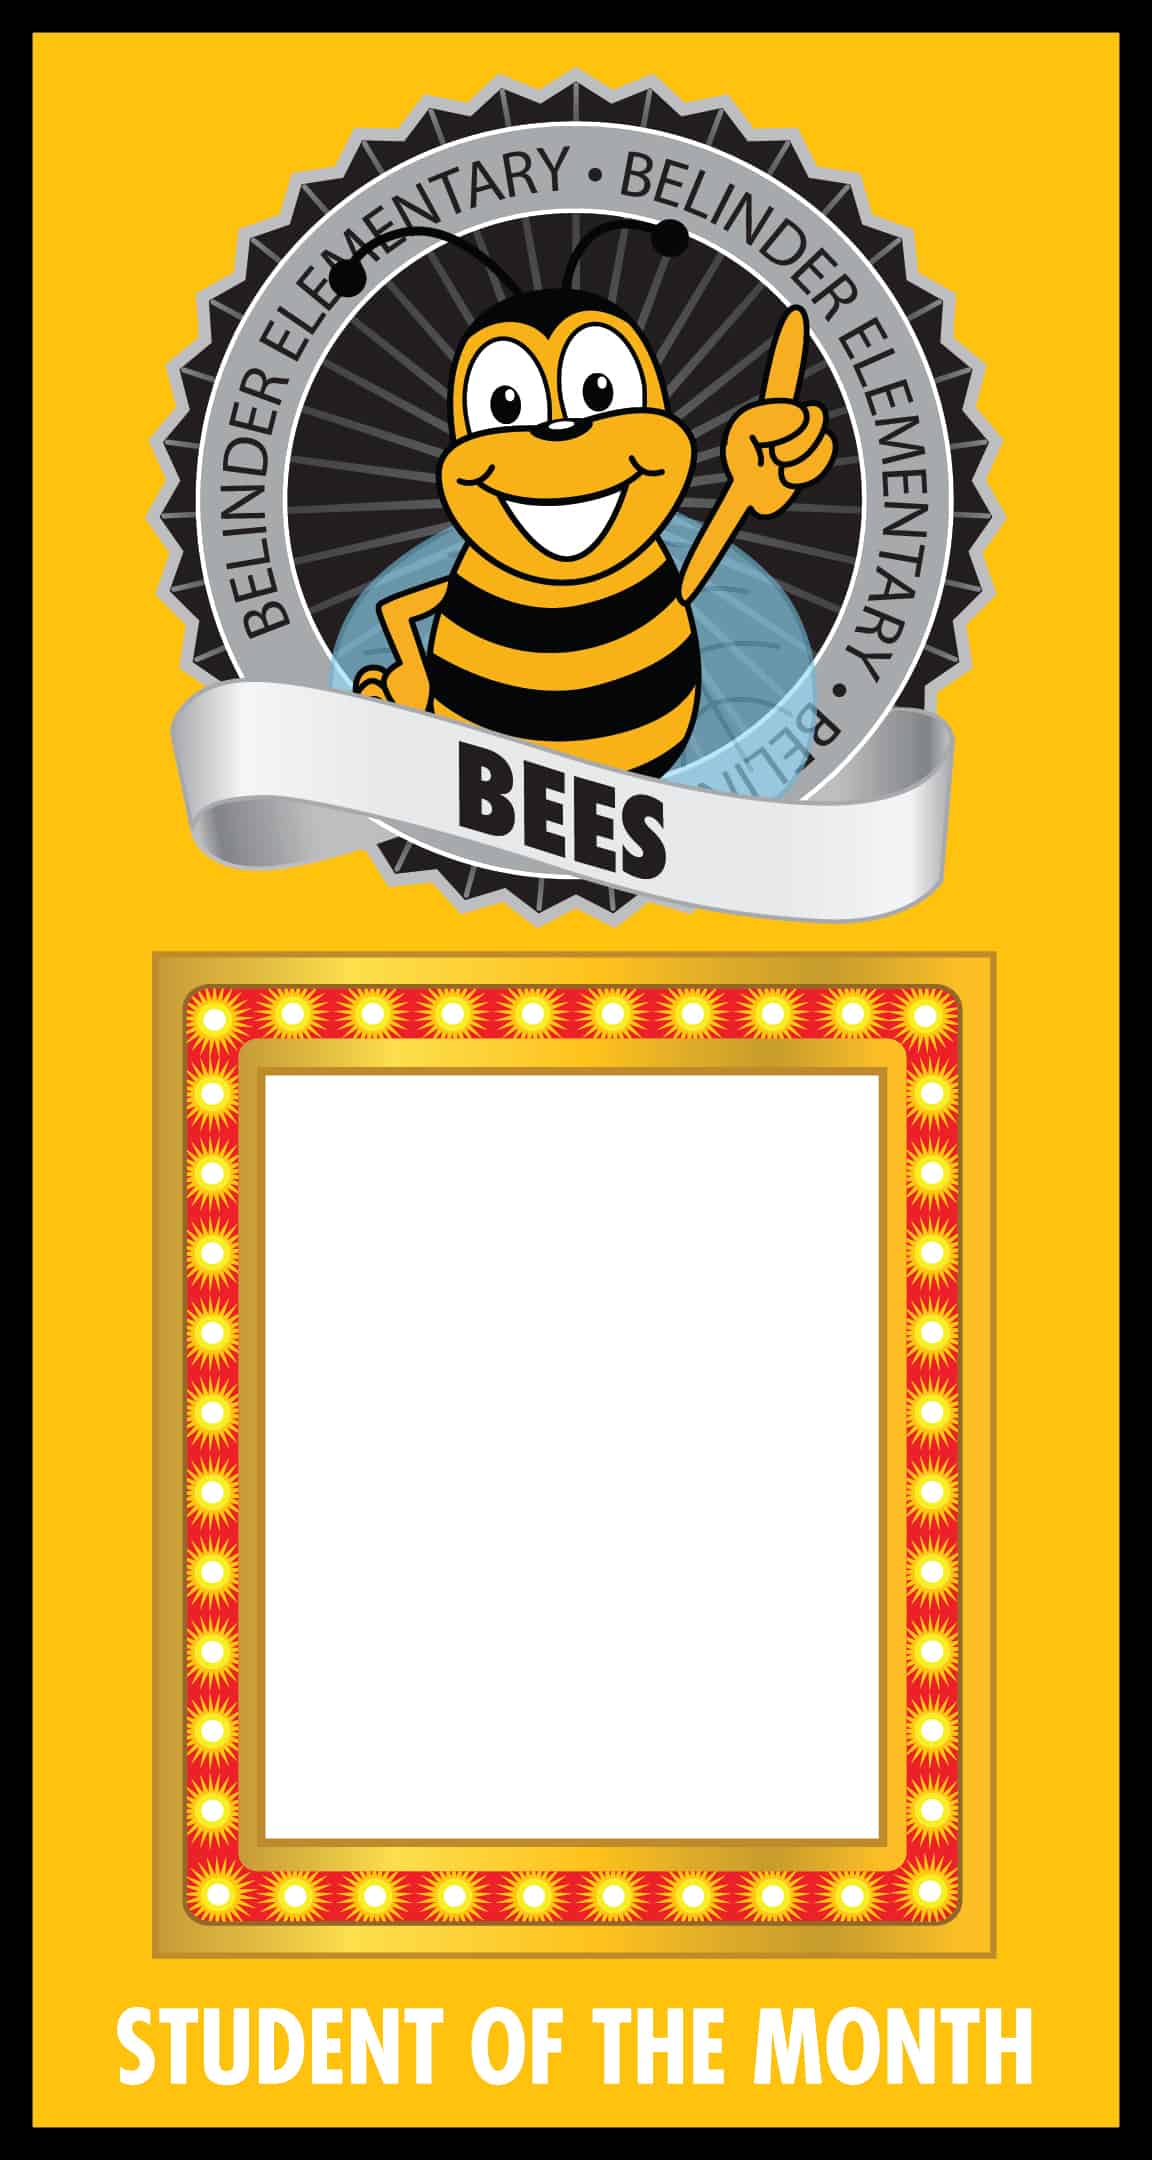 Photo-Marquee-bee1